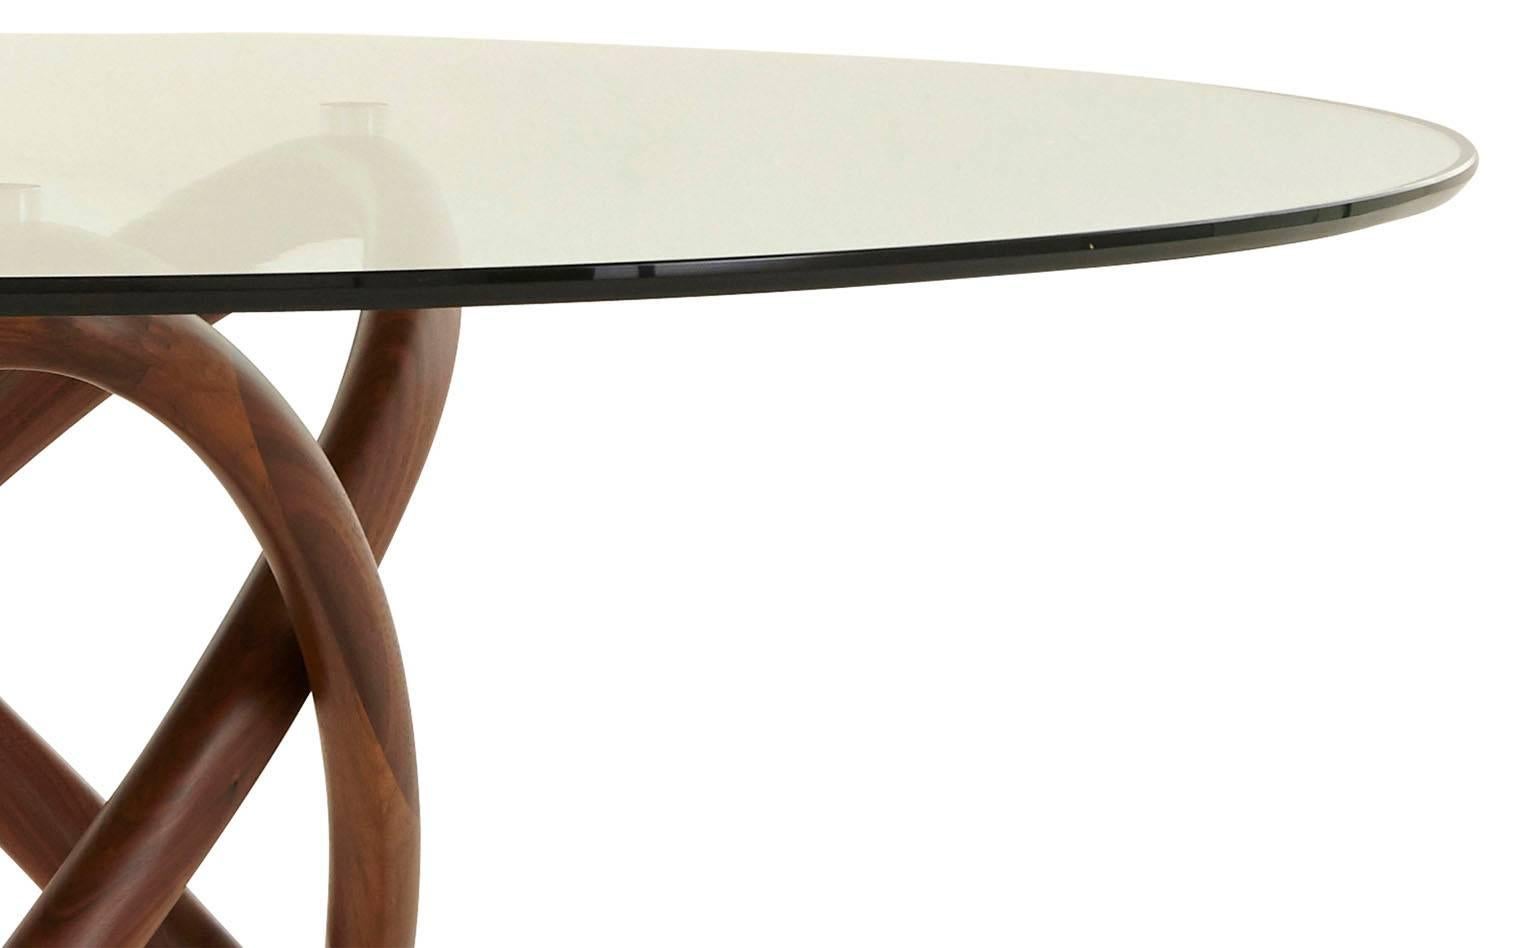 Our Ries table features three elliptical bentwood shapes intertwined to form its unique table base. The rich walnut wood finish is given maximum exposure by the beveled glass tabletop. Pair with our Ries dining chair to mimic the bentwood styling